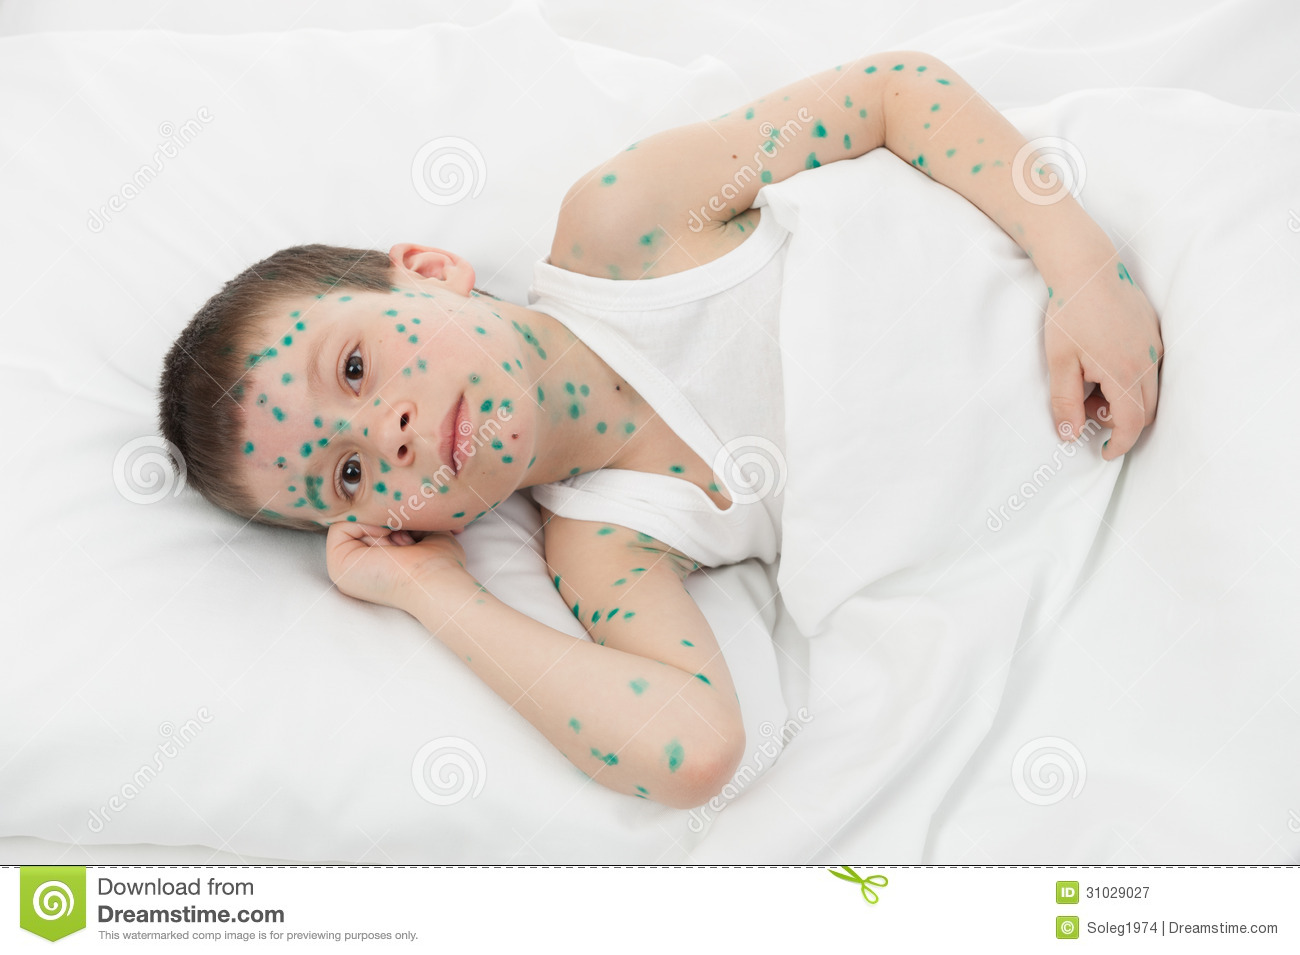 Sick Boy In White Bed Royalty Free Stock Photography   Image  31029027